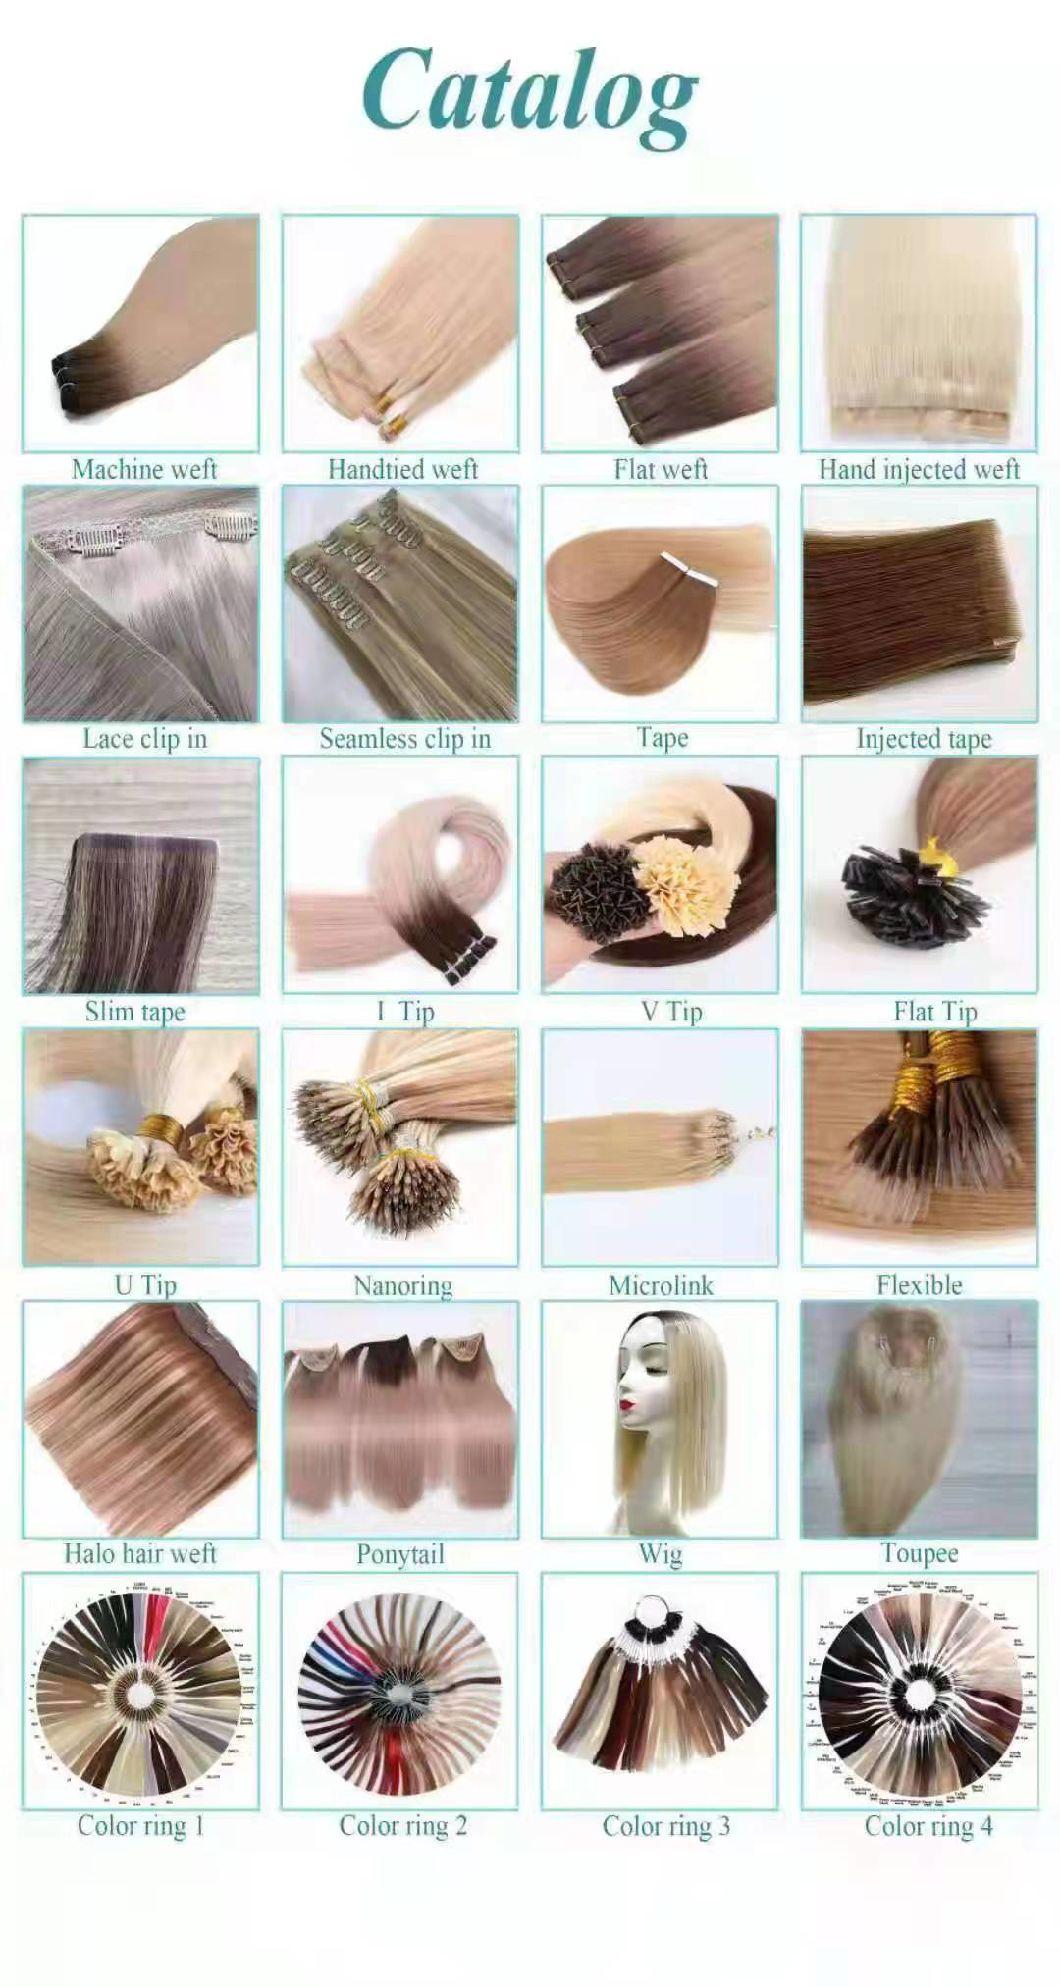 Mini Tape in Real Human Hair Extensions, Customised Hair Extension.